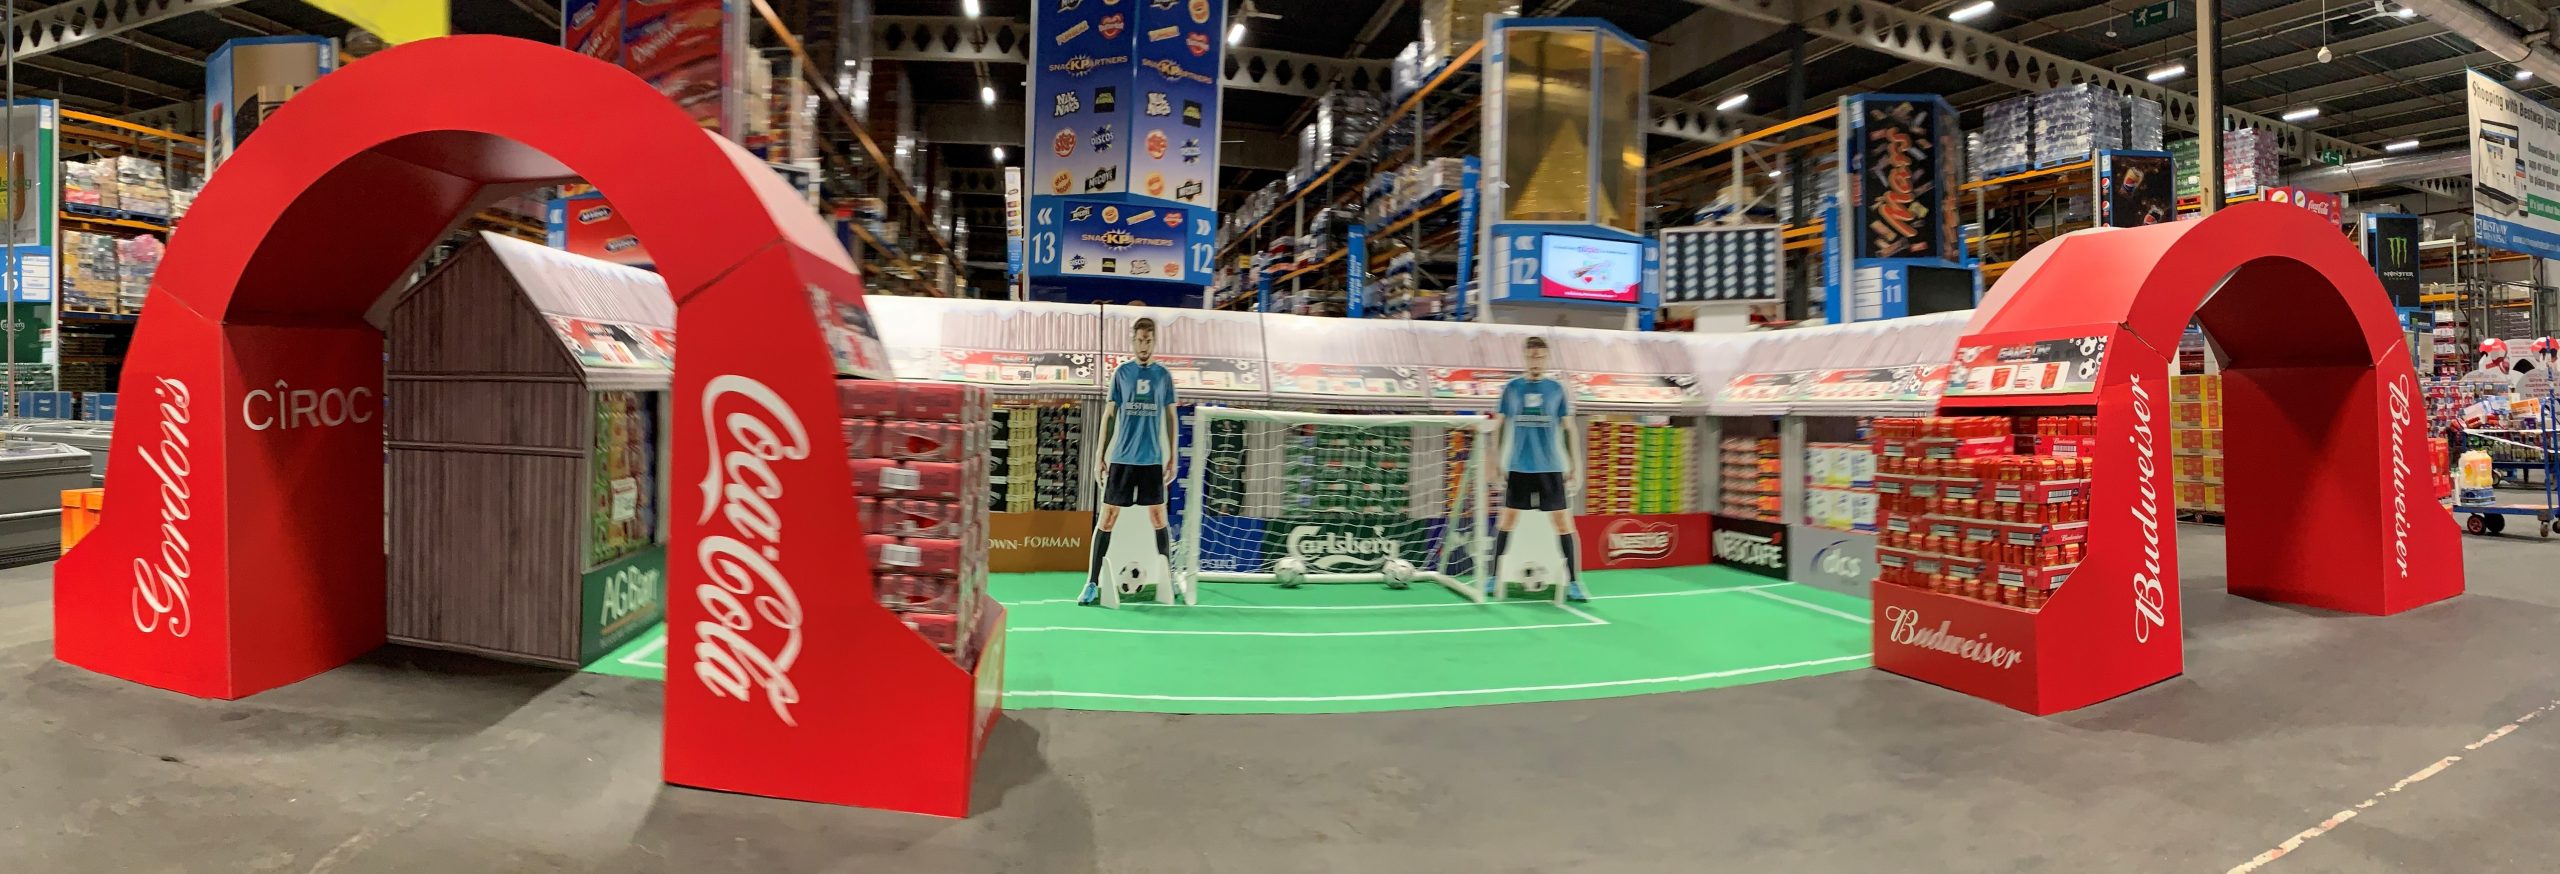 Bestway launches World Cup campaign for independent retailers